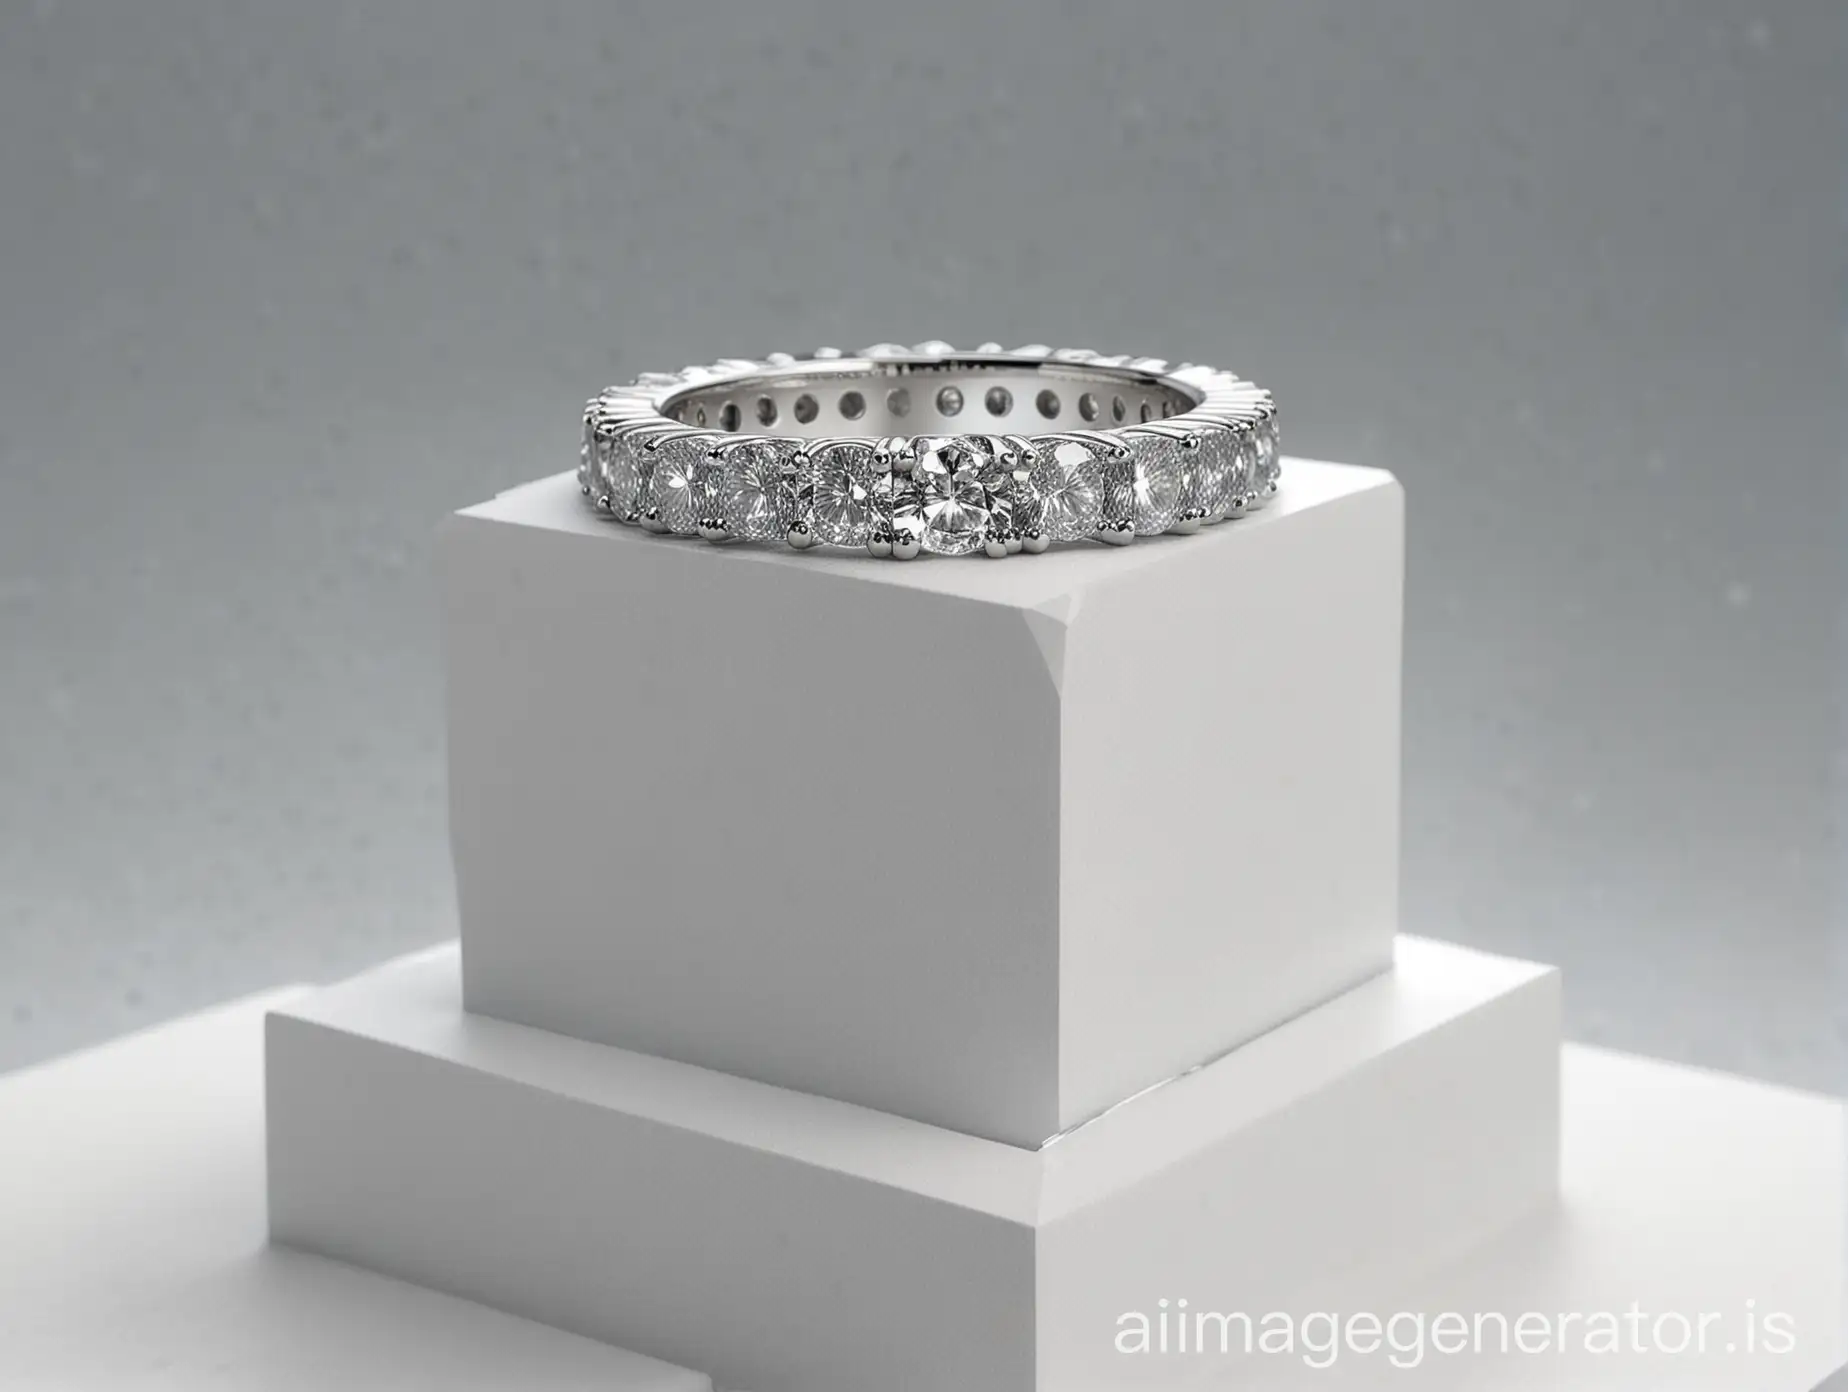 generate Diamond Eternity Bands Collection on top of square Podium one big Block. And Camera Angle is to be front.